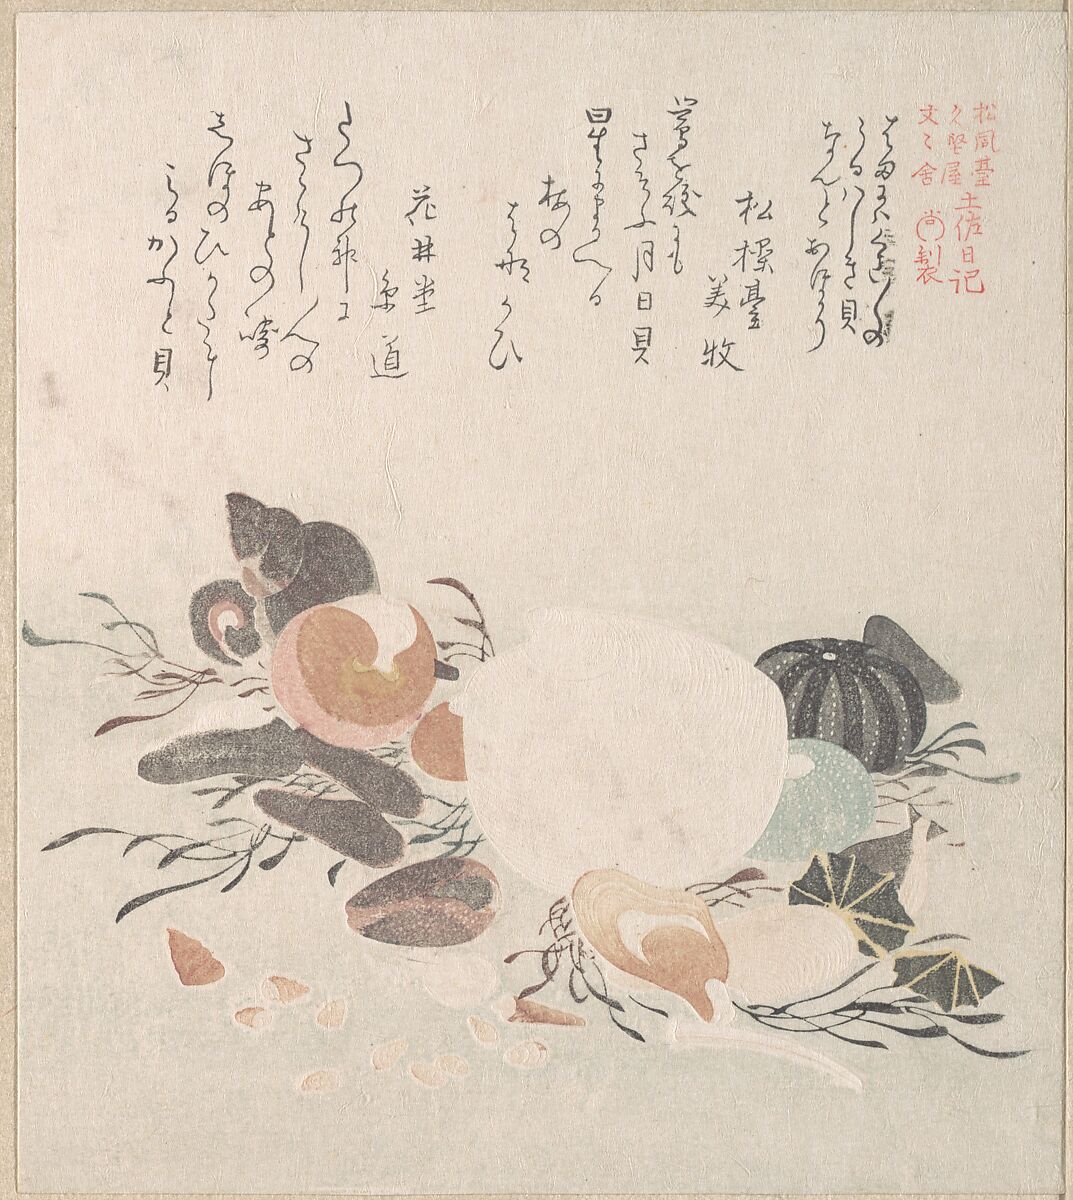 Various Shells with Sea Weeds, Kubo Shunman (Japanese, 1757–1820) (?), Woodblock print (surimono); ink and color on paper, Japan 